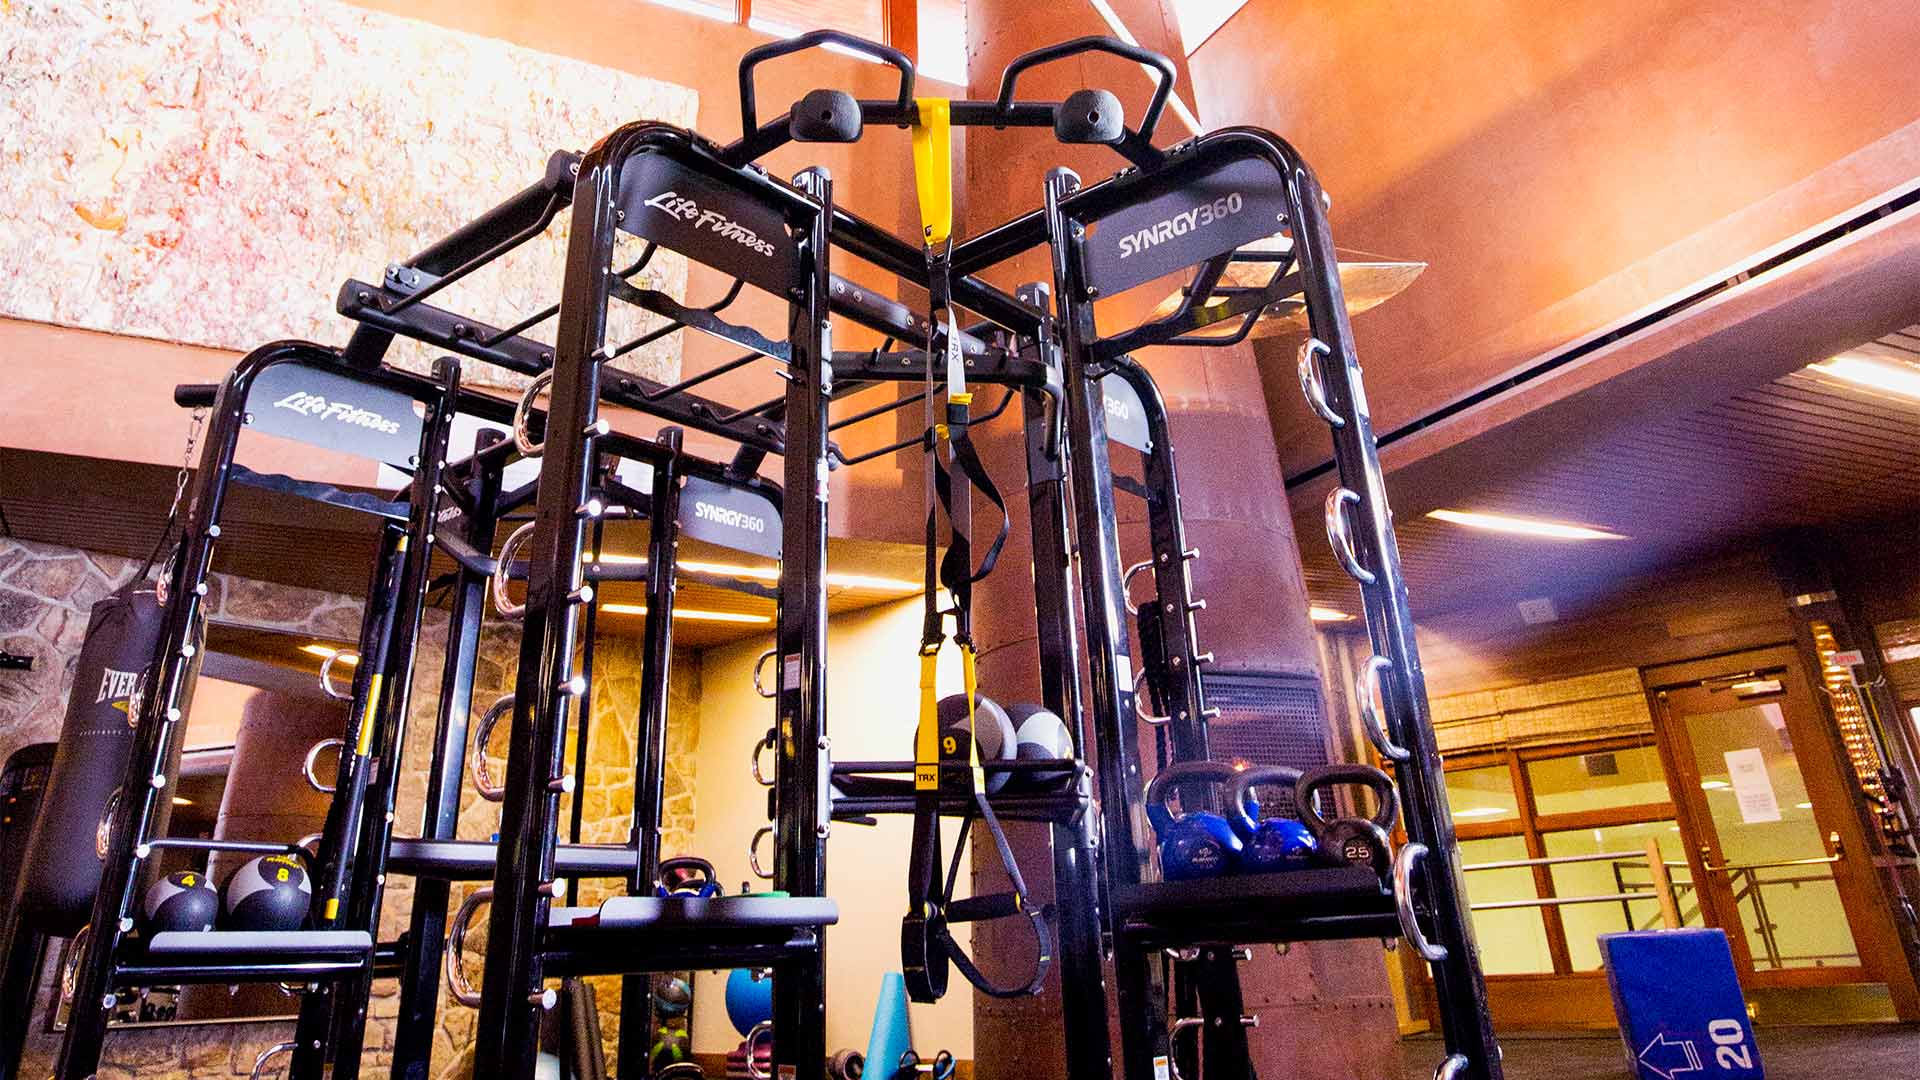 a detail shot of the high-end weight machines present at the fitness center